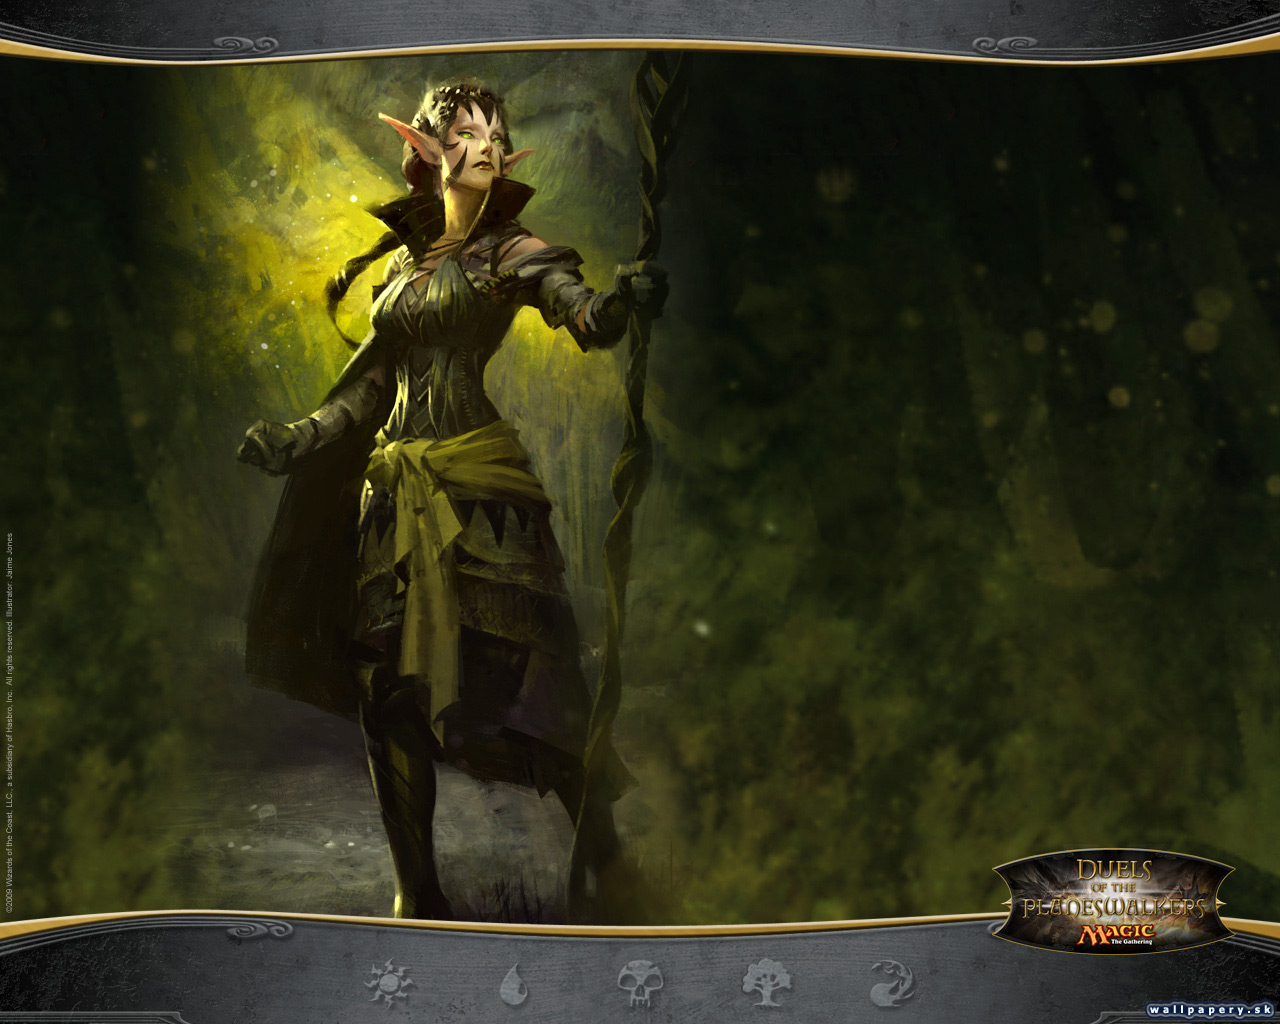 Magic: The Gathering - Duels of the Planeswalkers - wallpaper 2